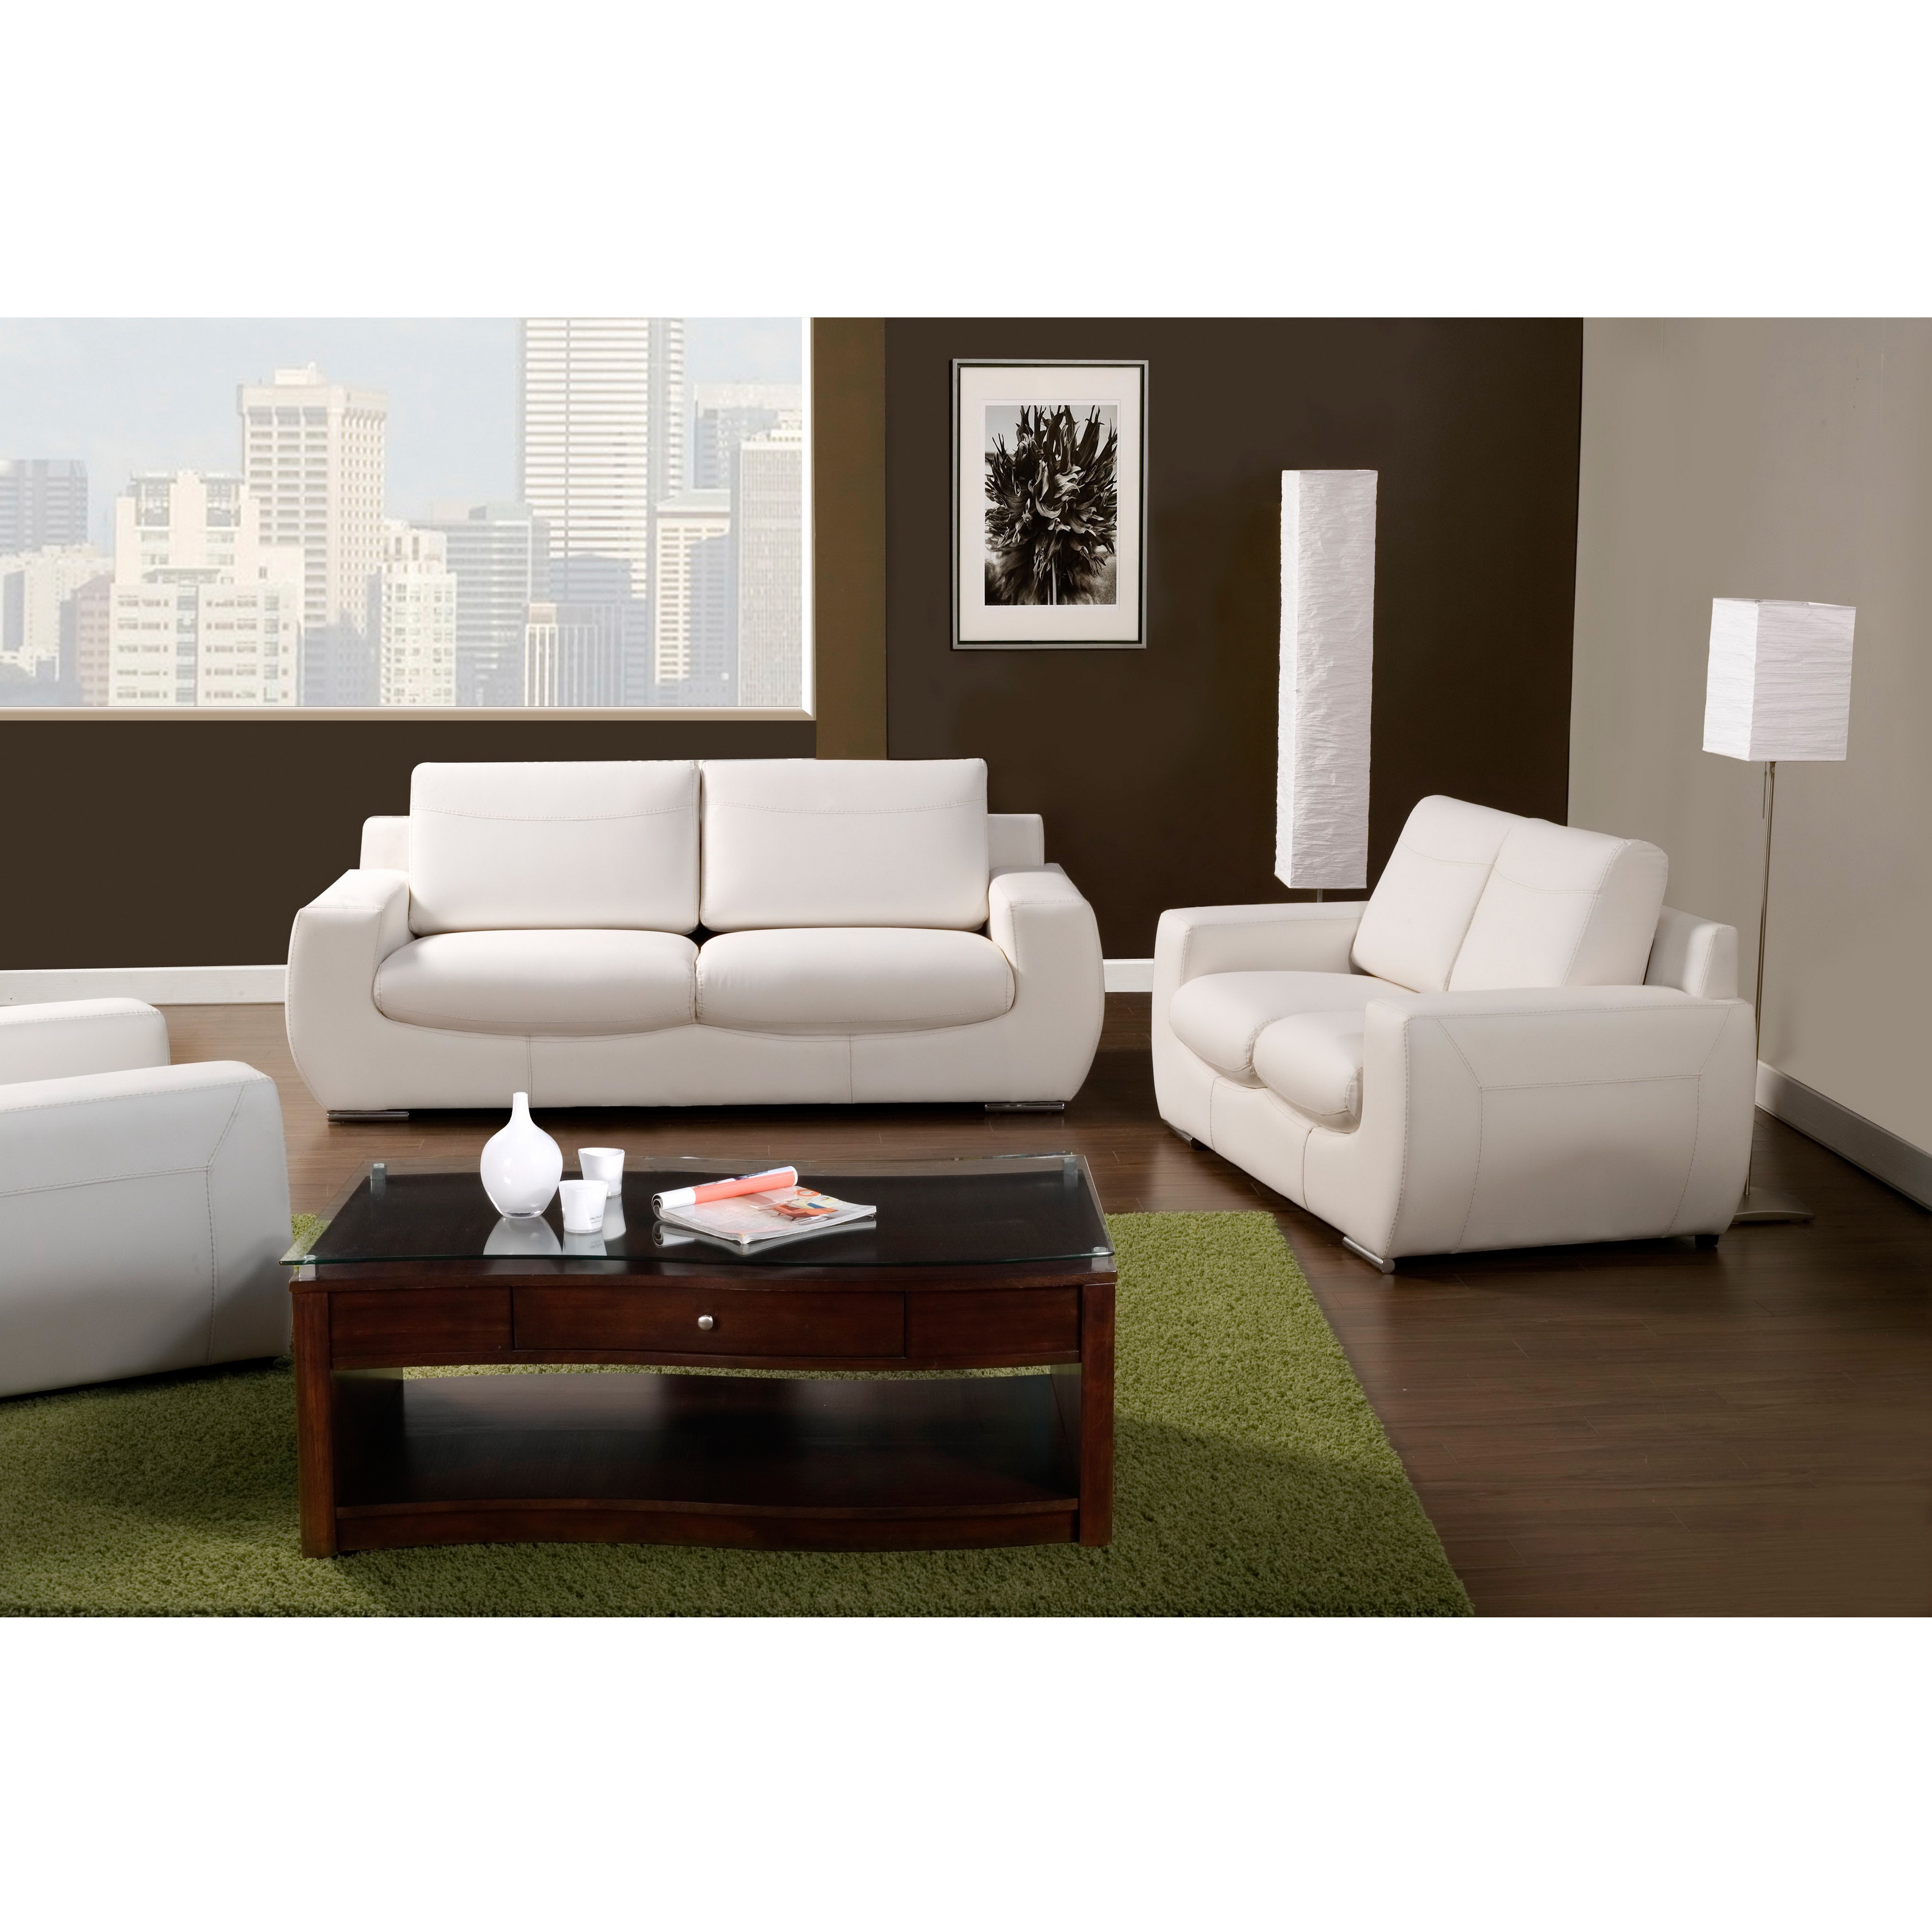 Furniture Of America Epperson 2 piece Sofa And Loveseat Set